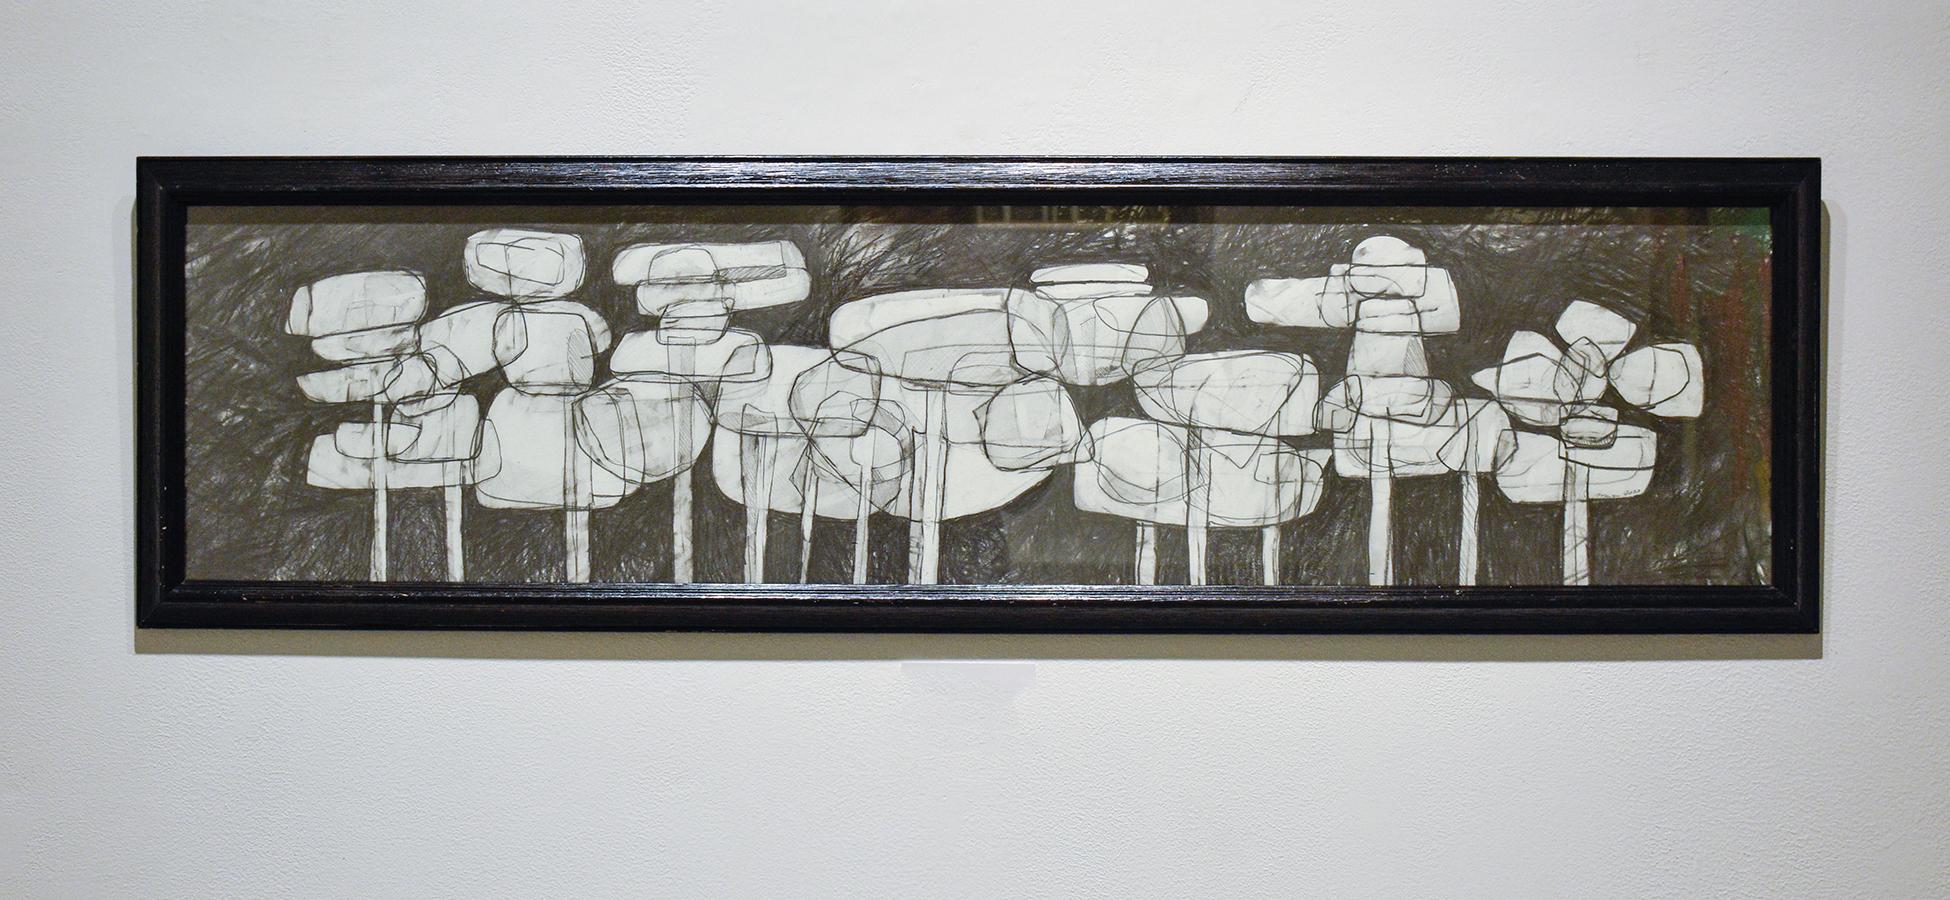 Waterlilies 24 (Abstract Figurative Graphite Drawing in Antique Black Frame) - Art by David Dew Bruner